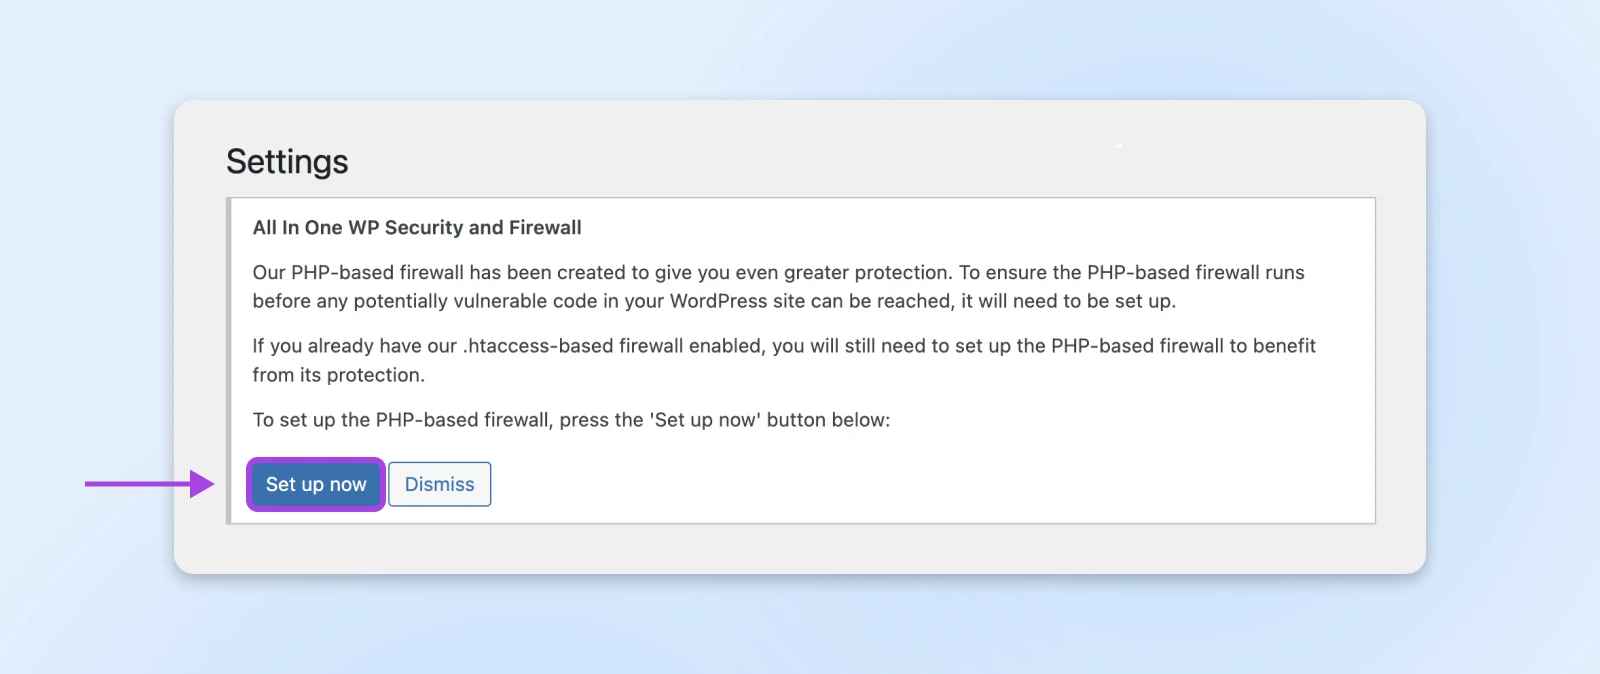 The Settings box introduces the 'All In One WP Security and Firewall.' Click the blue button to 'Set up now.'